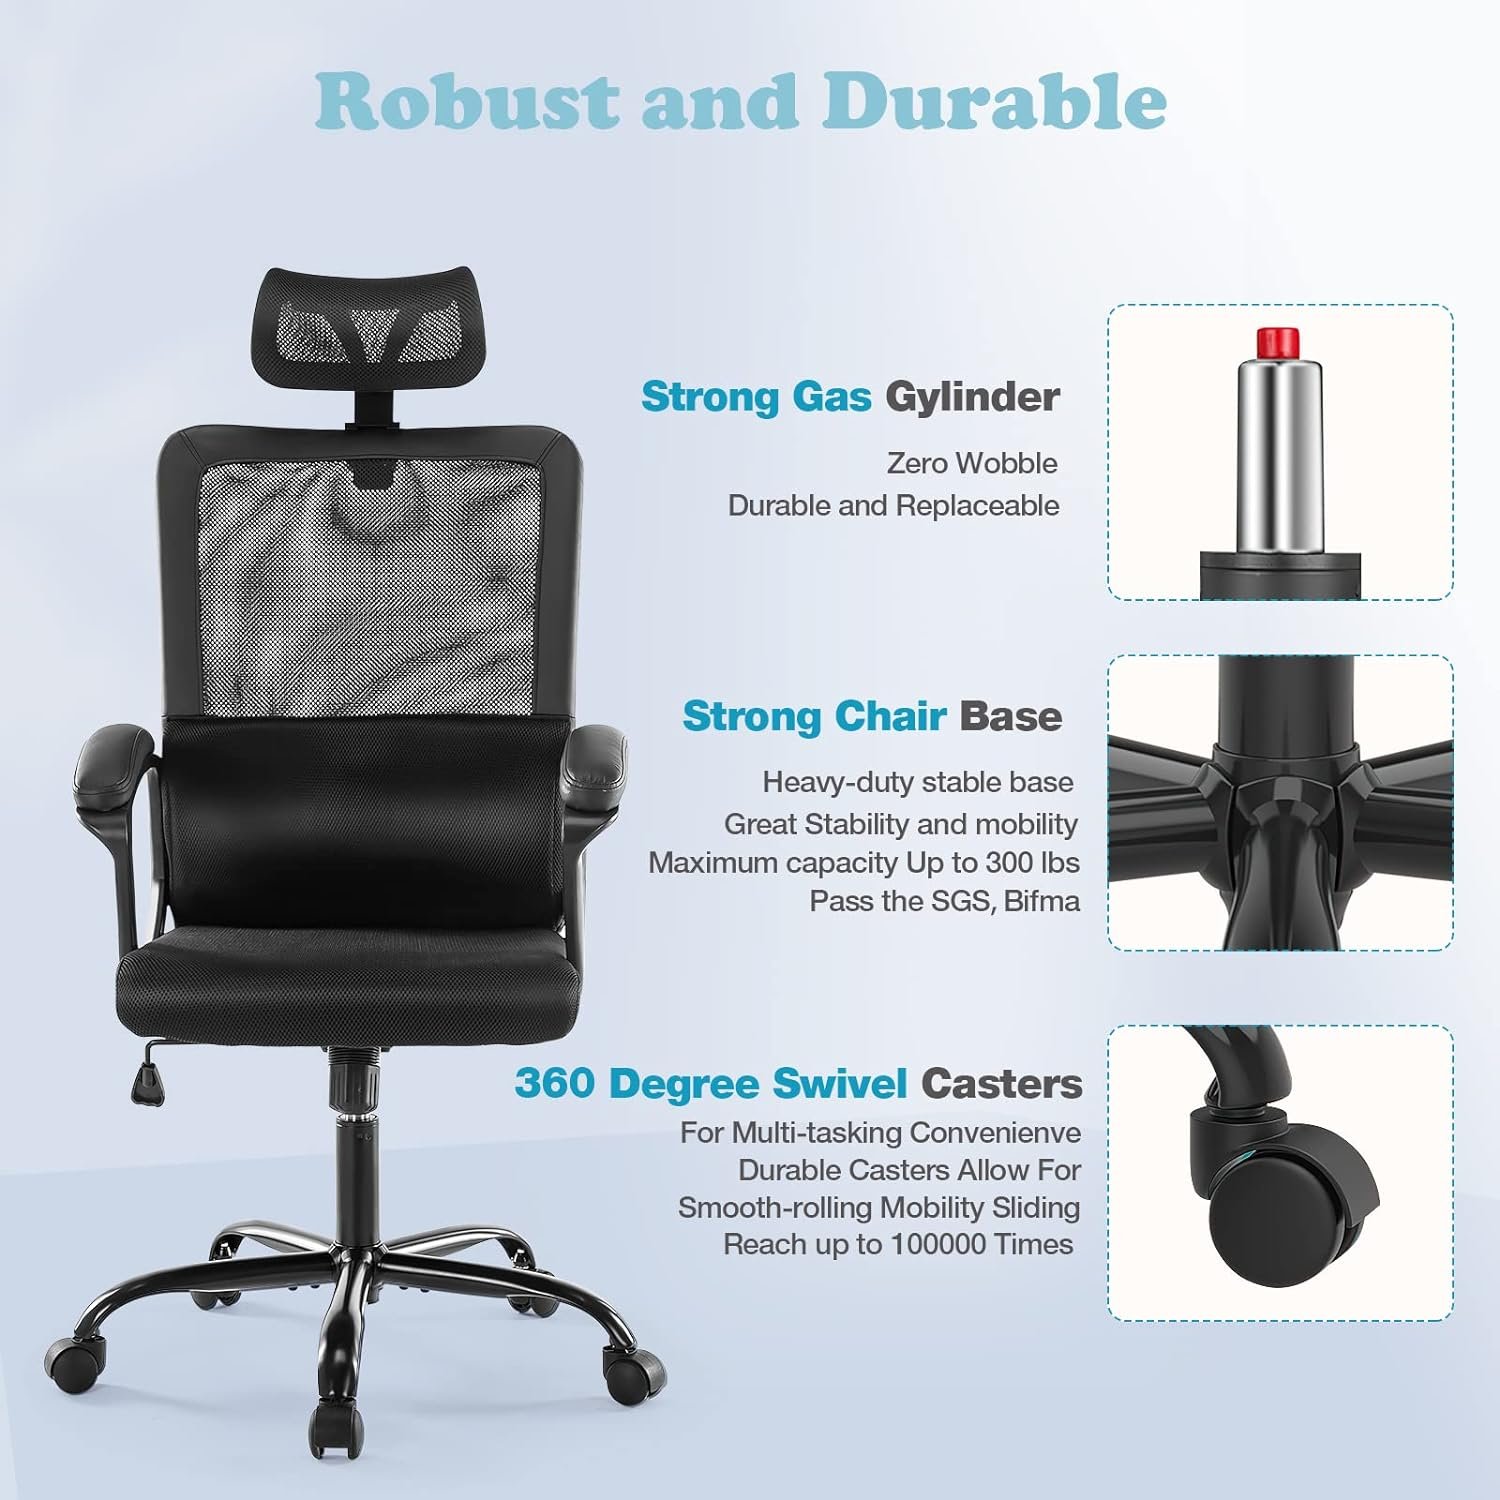 JHK Ergonomic High Back Mesh Lumbar Adjustable Height Rolling Swivel Computer Task Home Office Chairs with Support Armrest for Adults, Light Gray